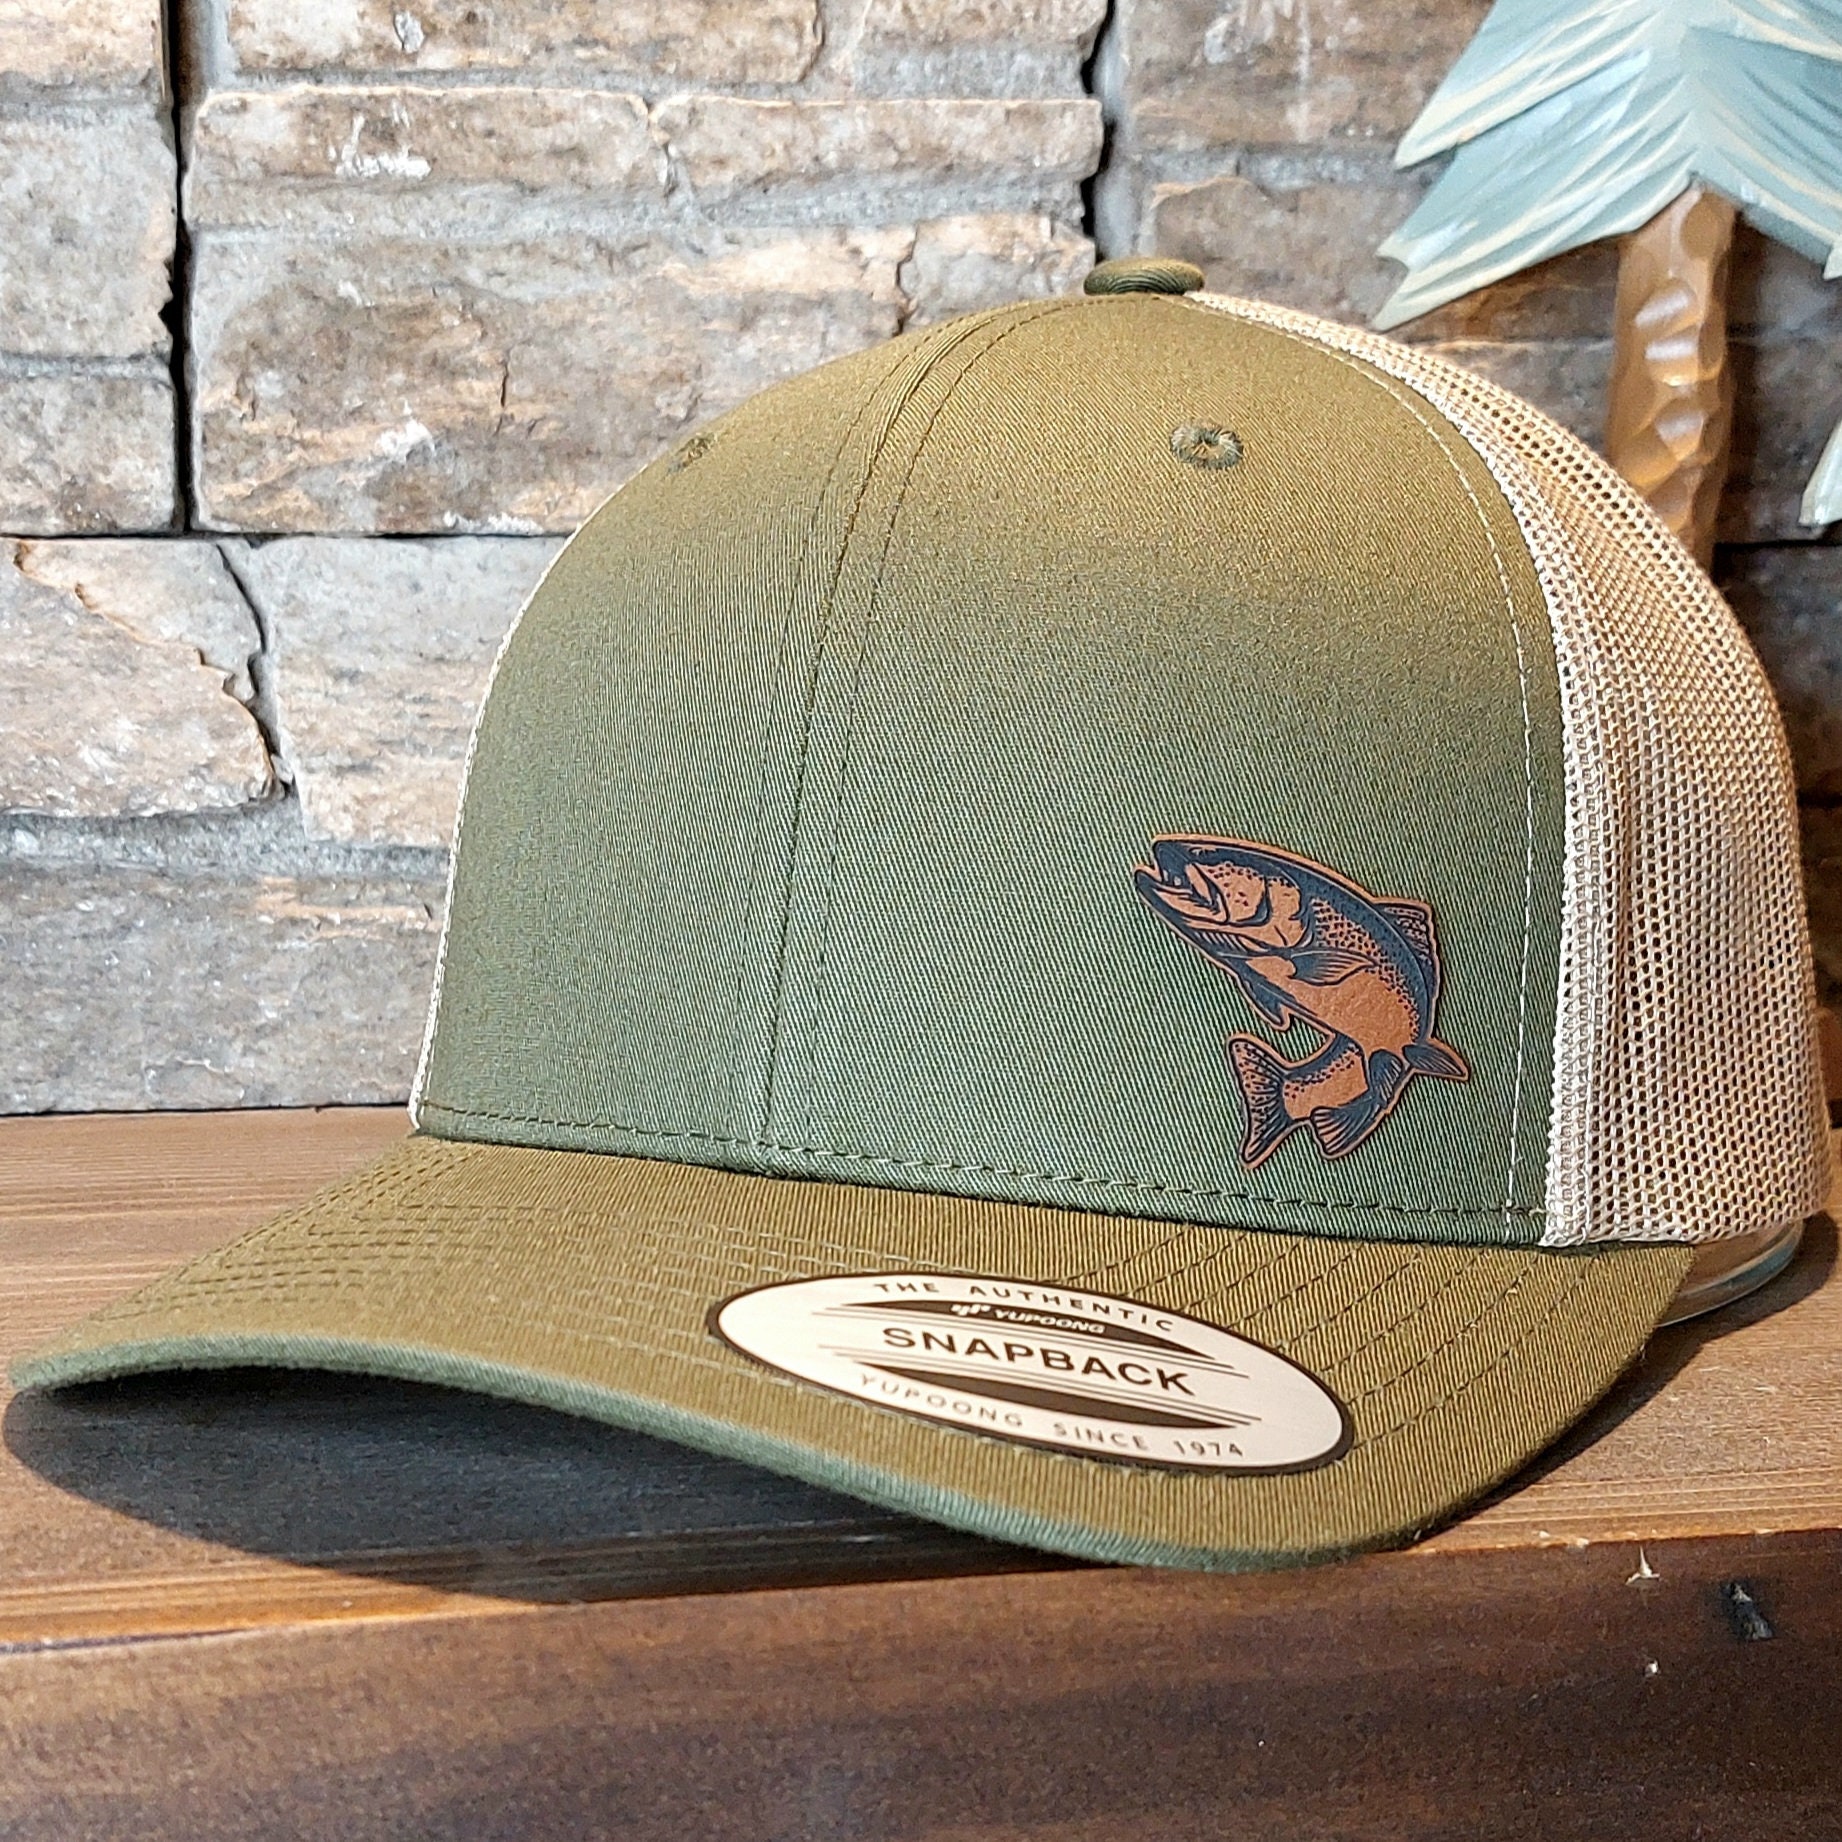 Trout Fishing Hat, Trout Fisherman Gifts, Rainbow Trout Fly